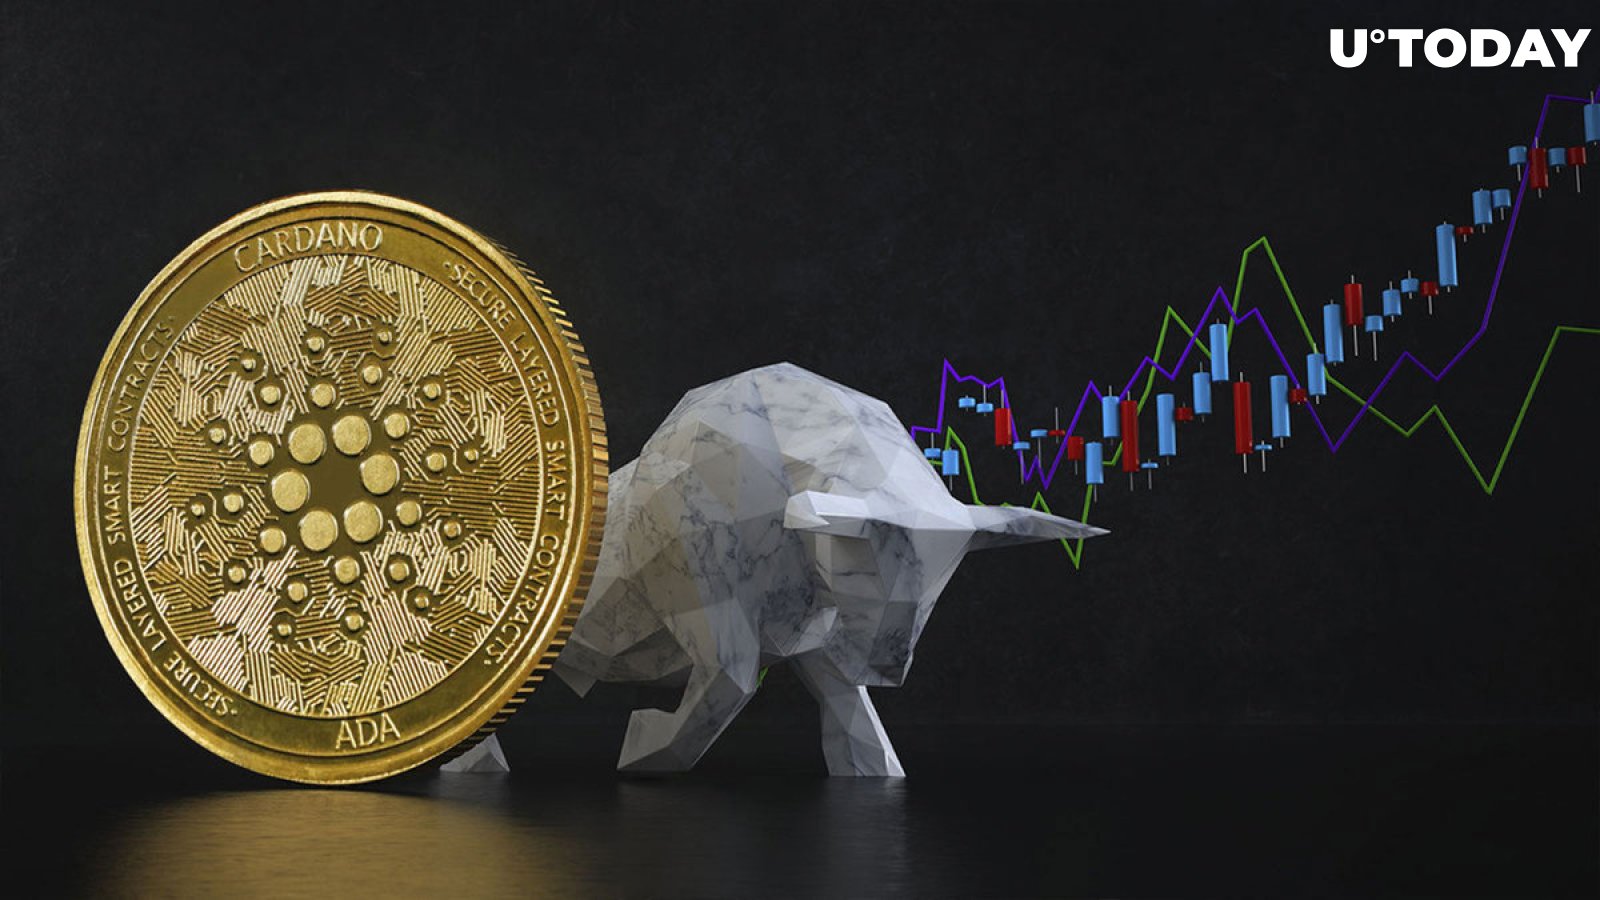 Cardano (ADA) price could see recovery as bullish signal emerges